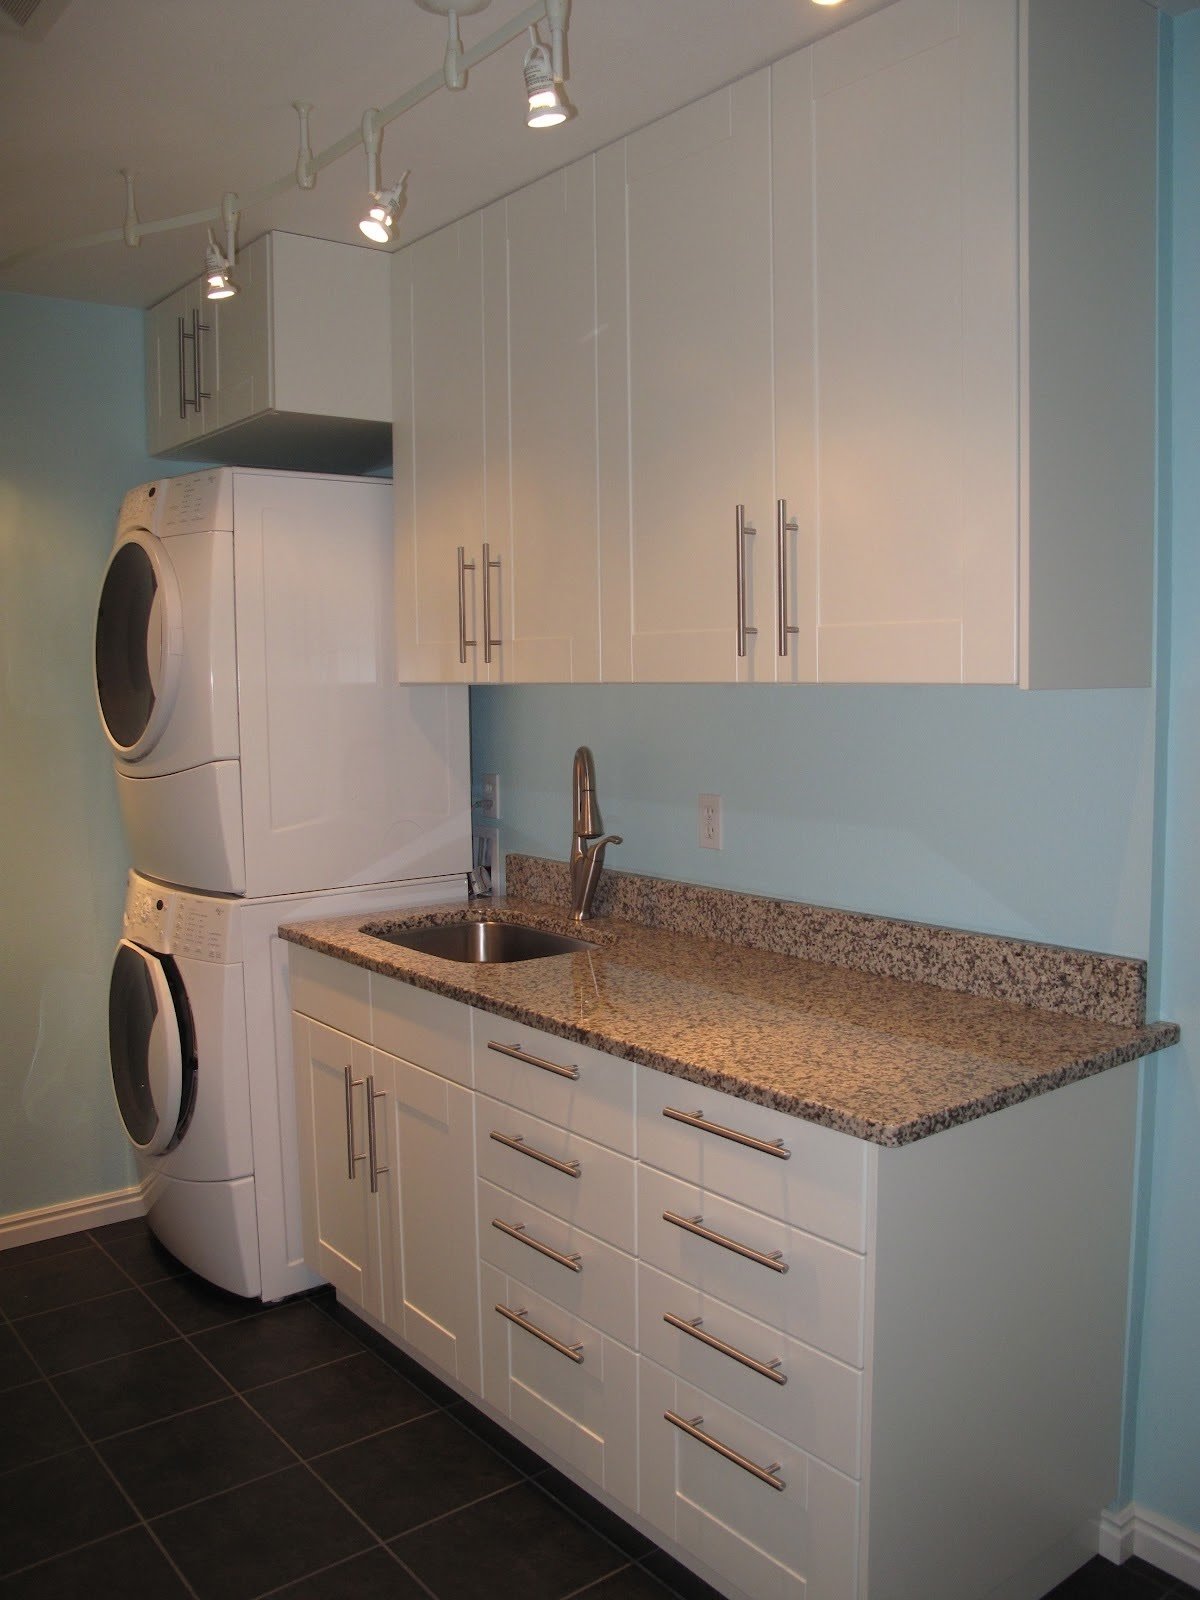 Laundry Room Sink Cabinet Visualhunt, Utility Sink With Countertop